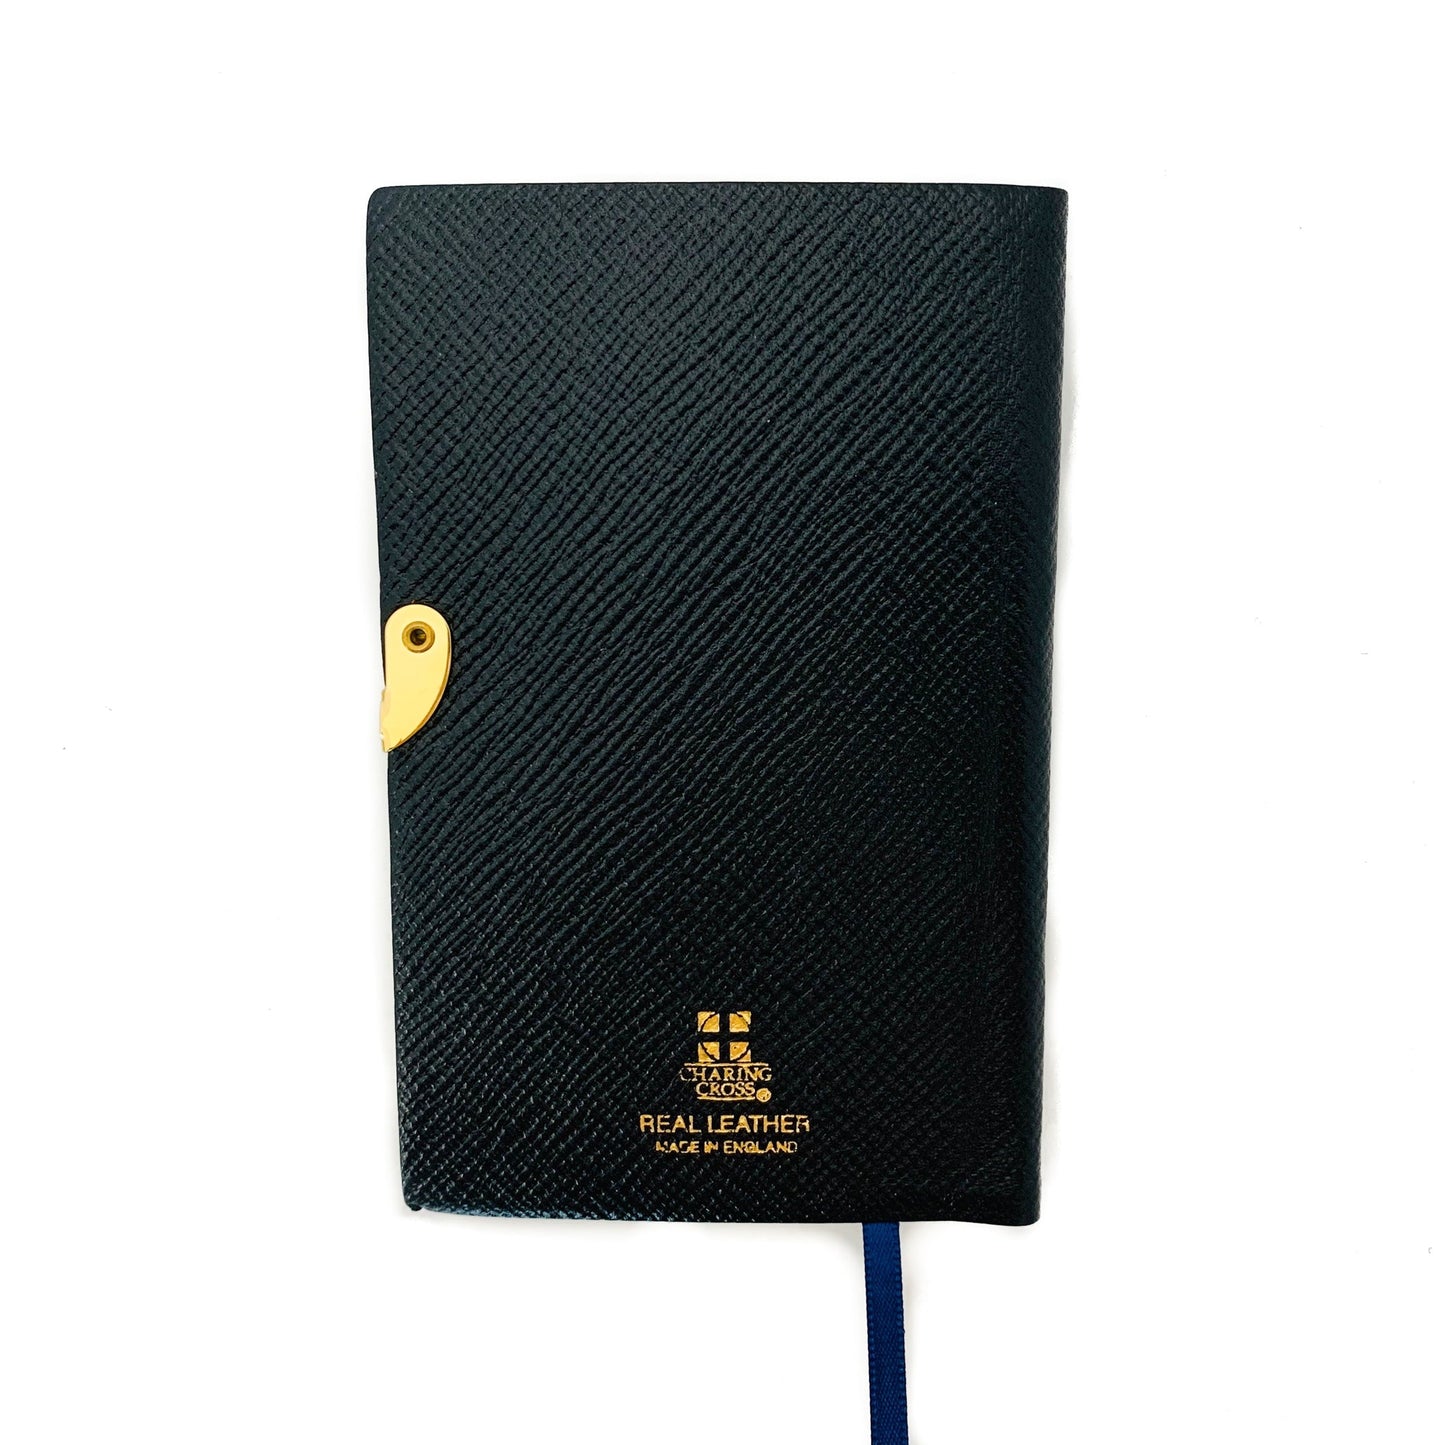 YEAR 2023 CROSSGRAIN Leather Pocket Calendar Book | 5 x 3" | Pencil with Gold Clasp | D753LJC